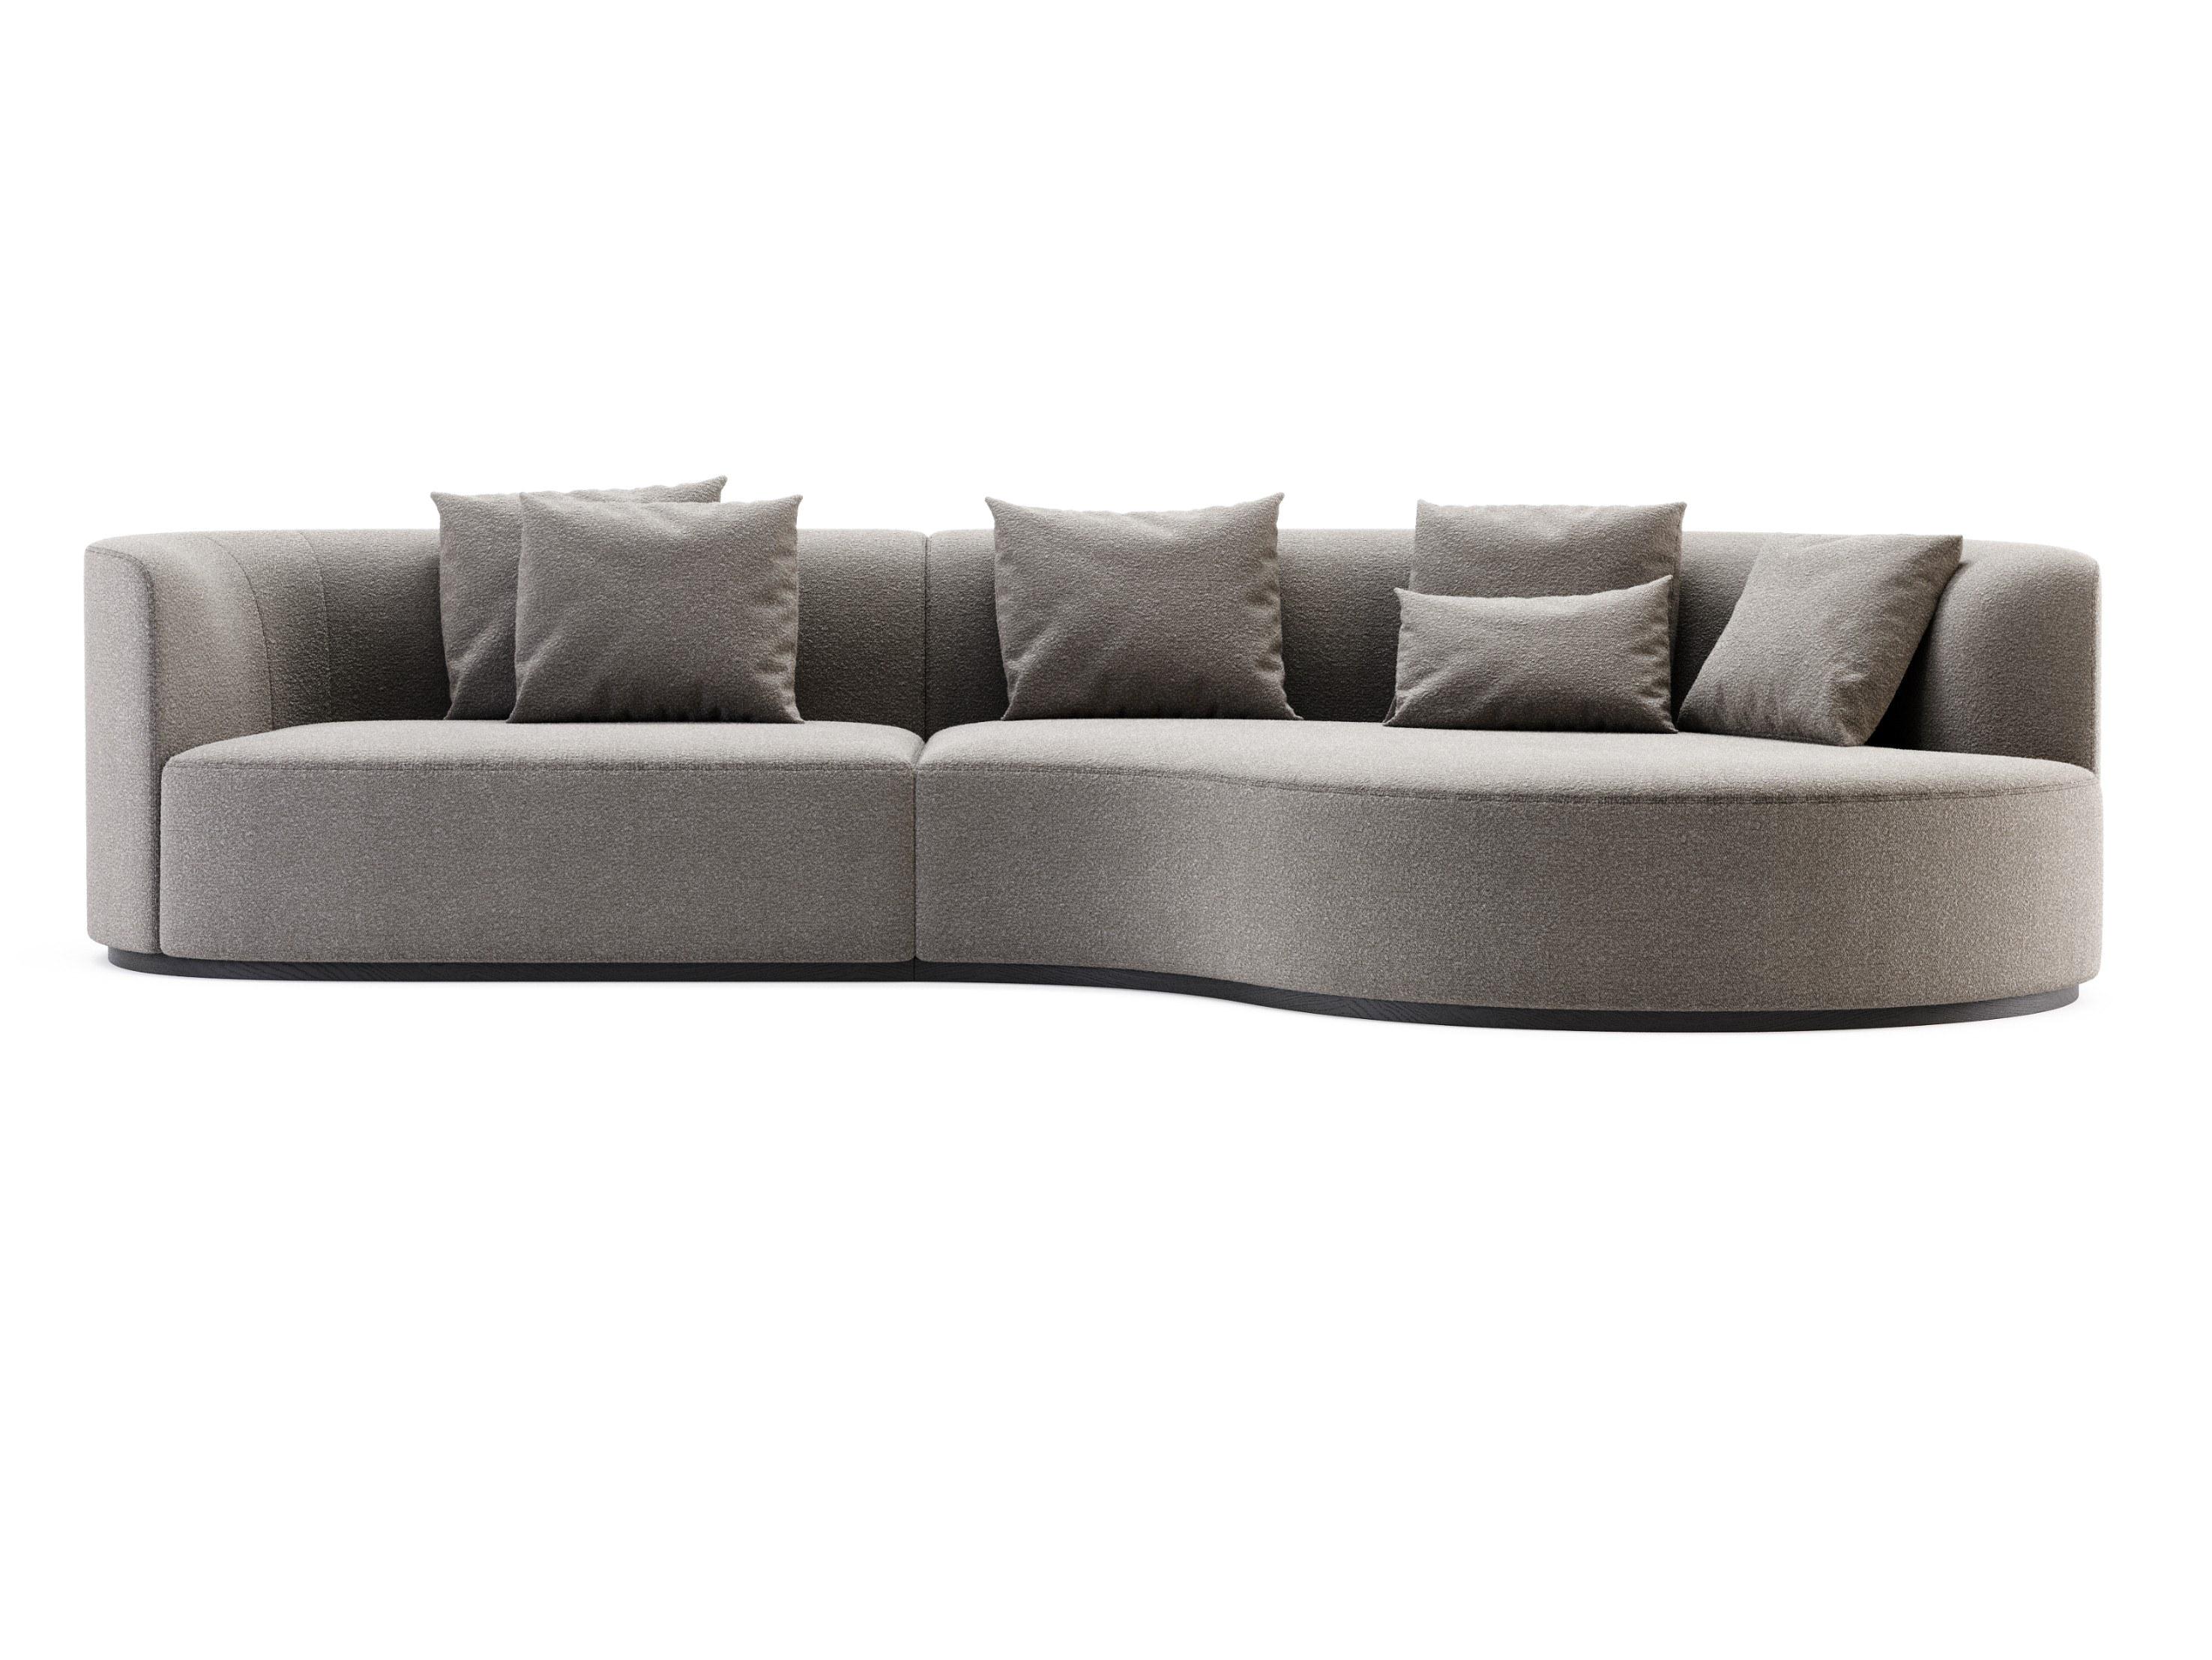 Made to order sofa with deep curved chaise offered in a selection of luxurious performance soft fabric. 
The base is offered in metal or wood in several colors and finishes.
The metal is polished or brushed stainless steel in several colors.
The